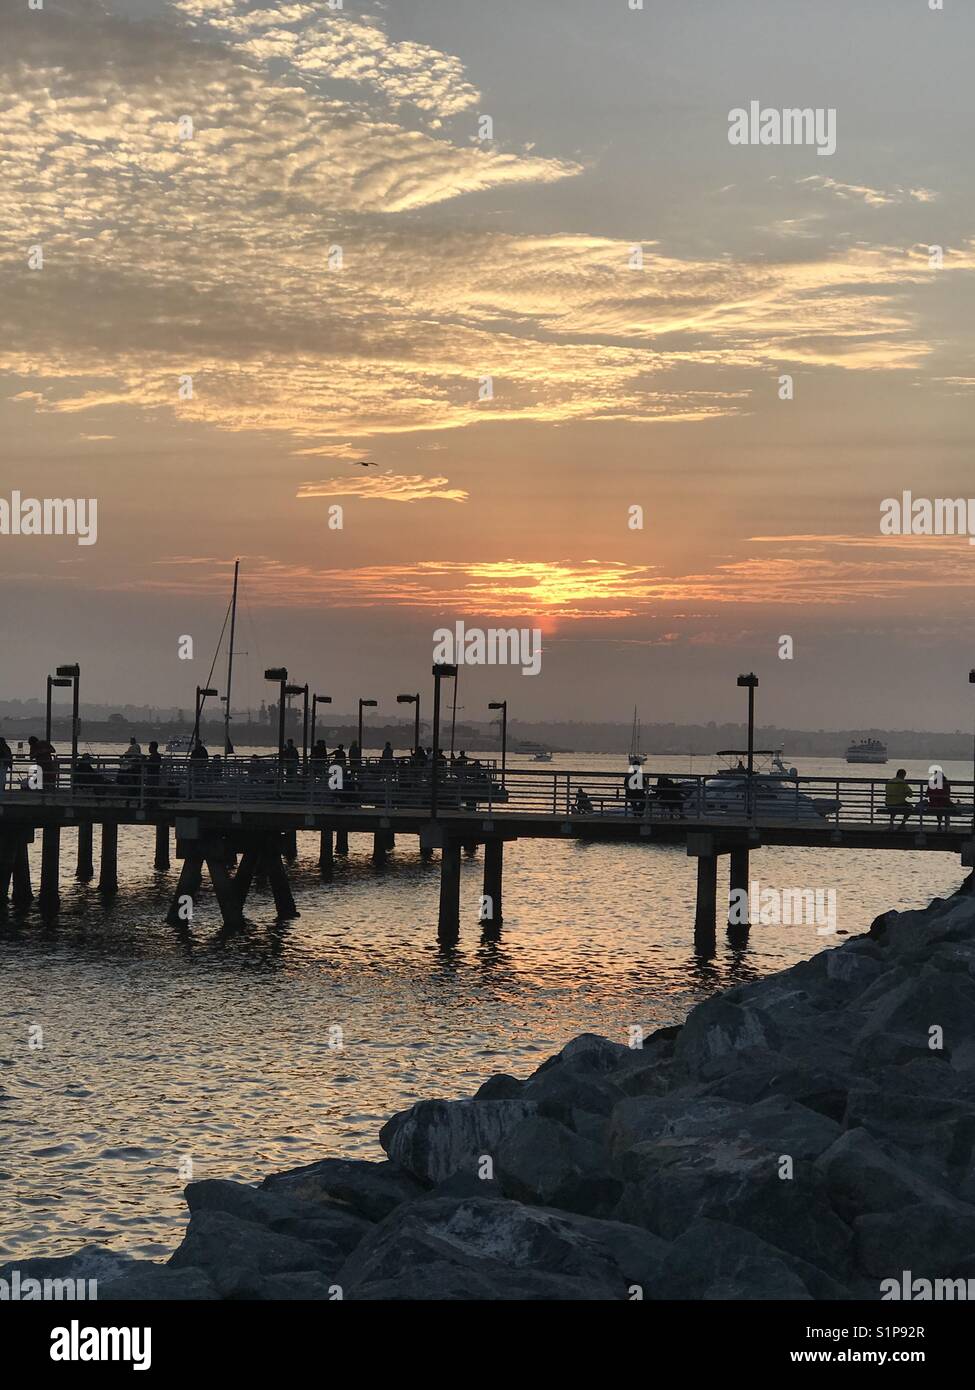 The perfect frisking spot on the San Diego Bay Stock Photo